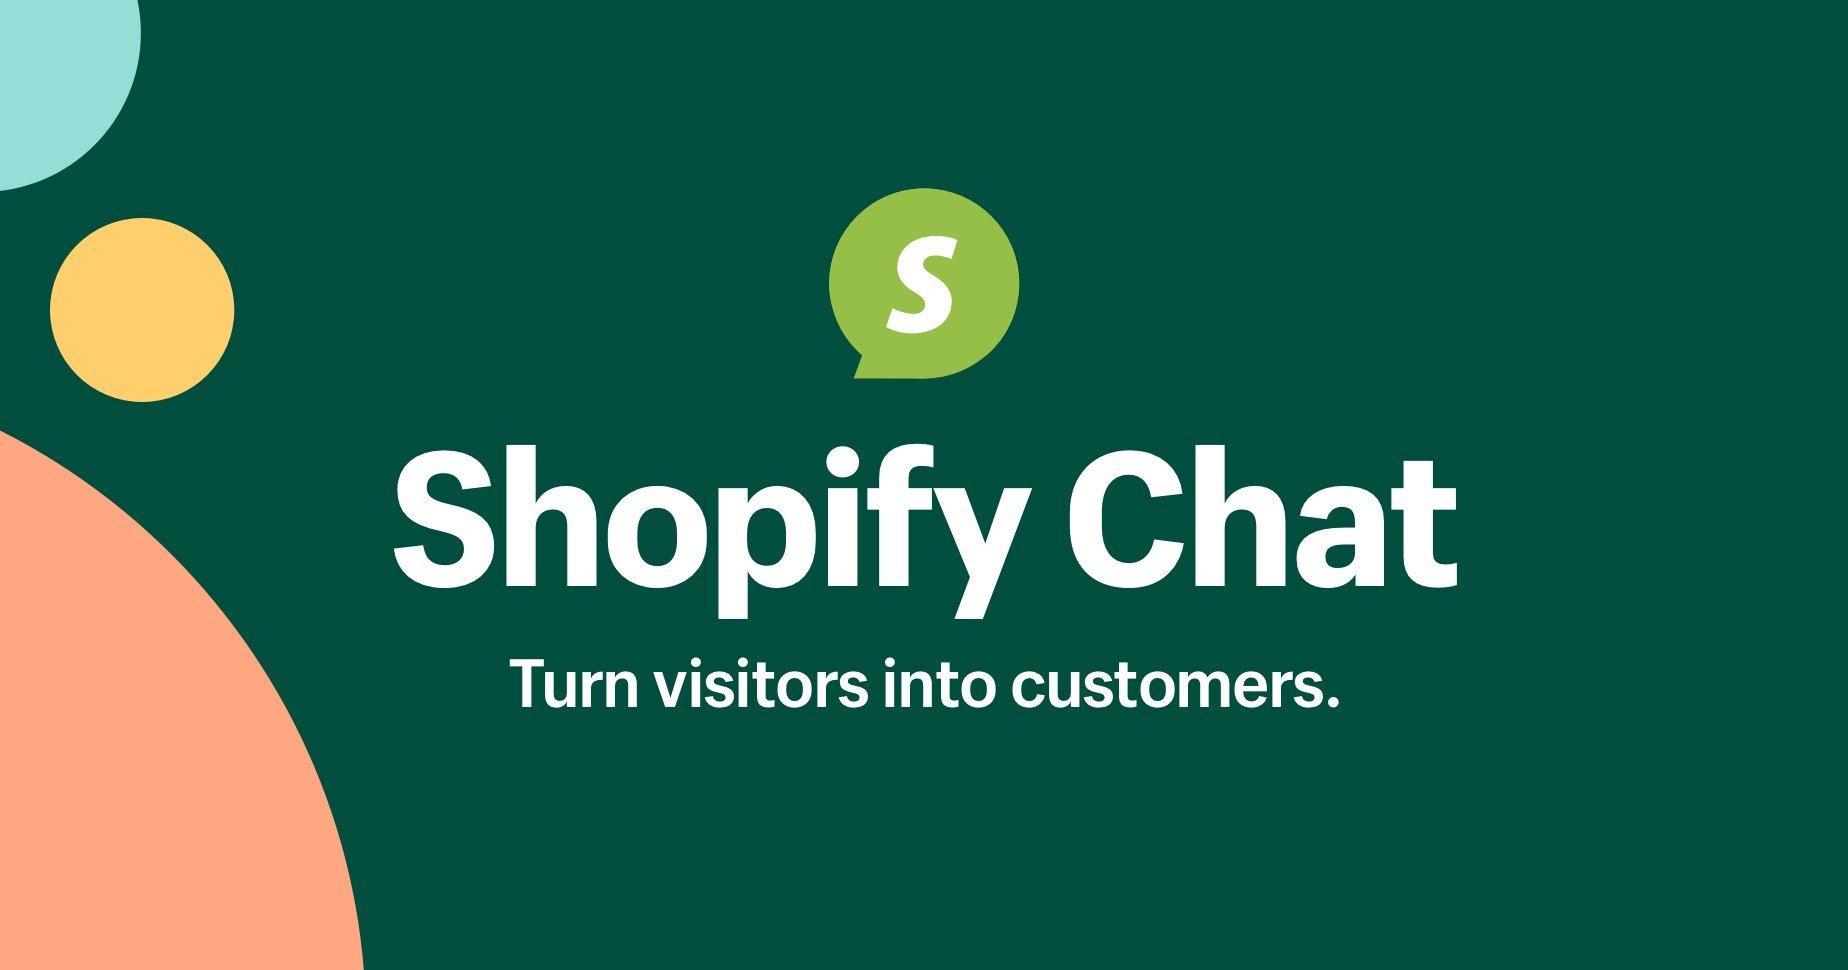 Shopify launches Shopify Chat